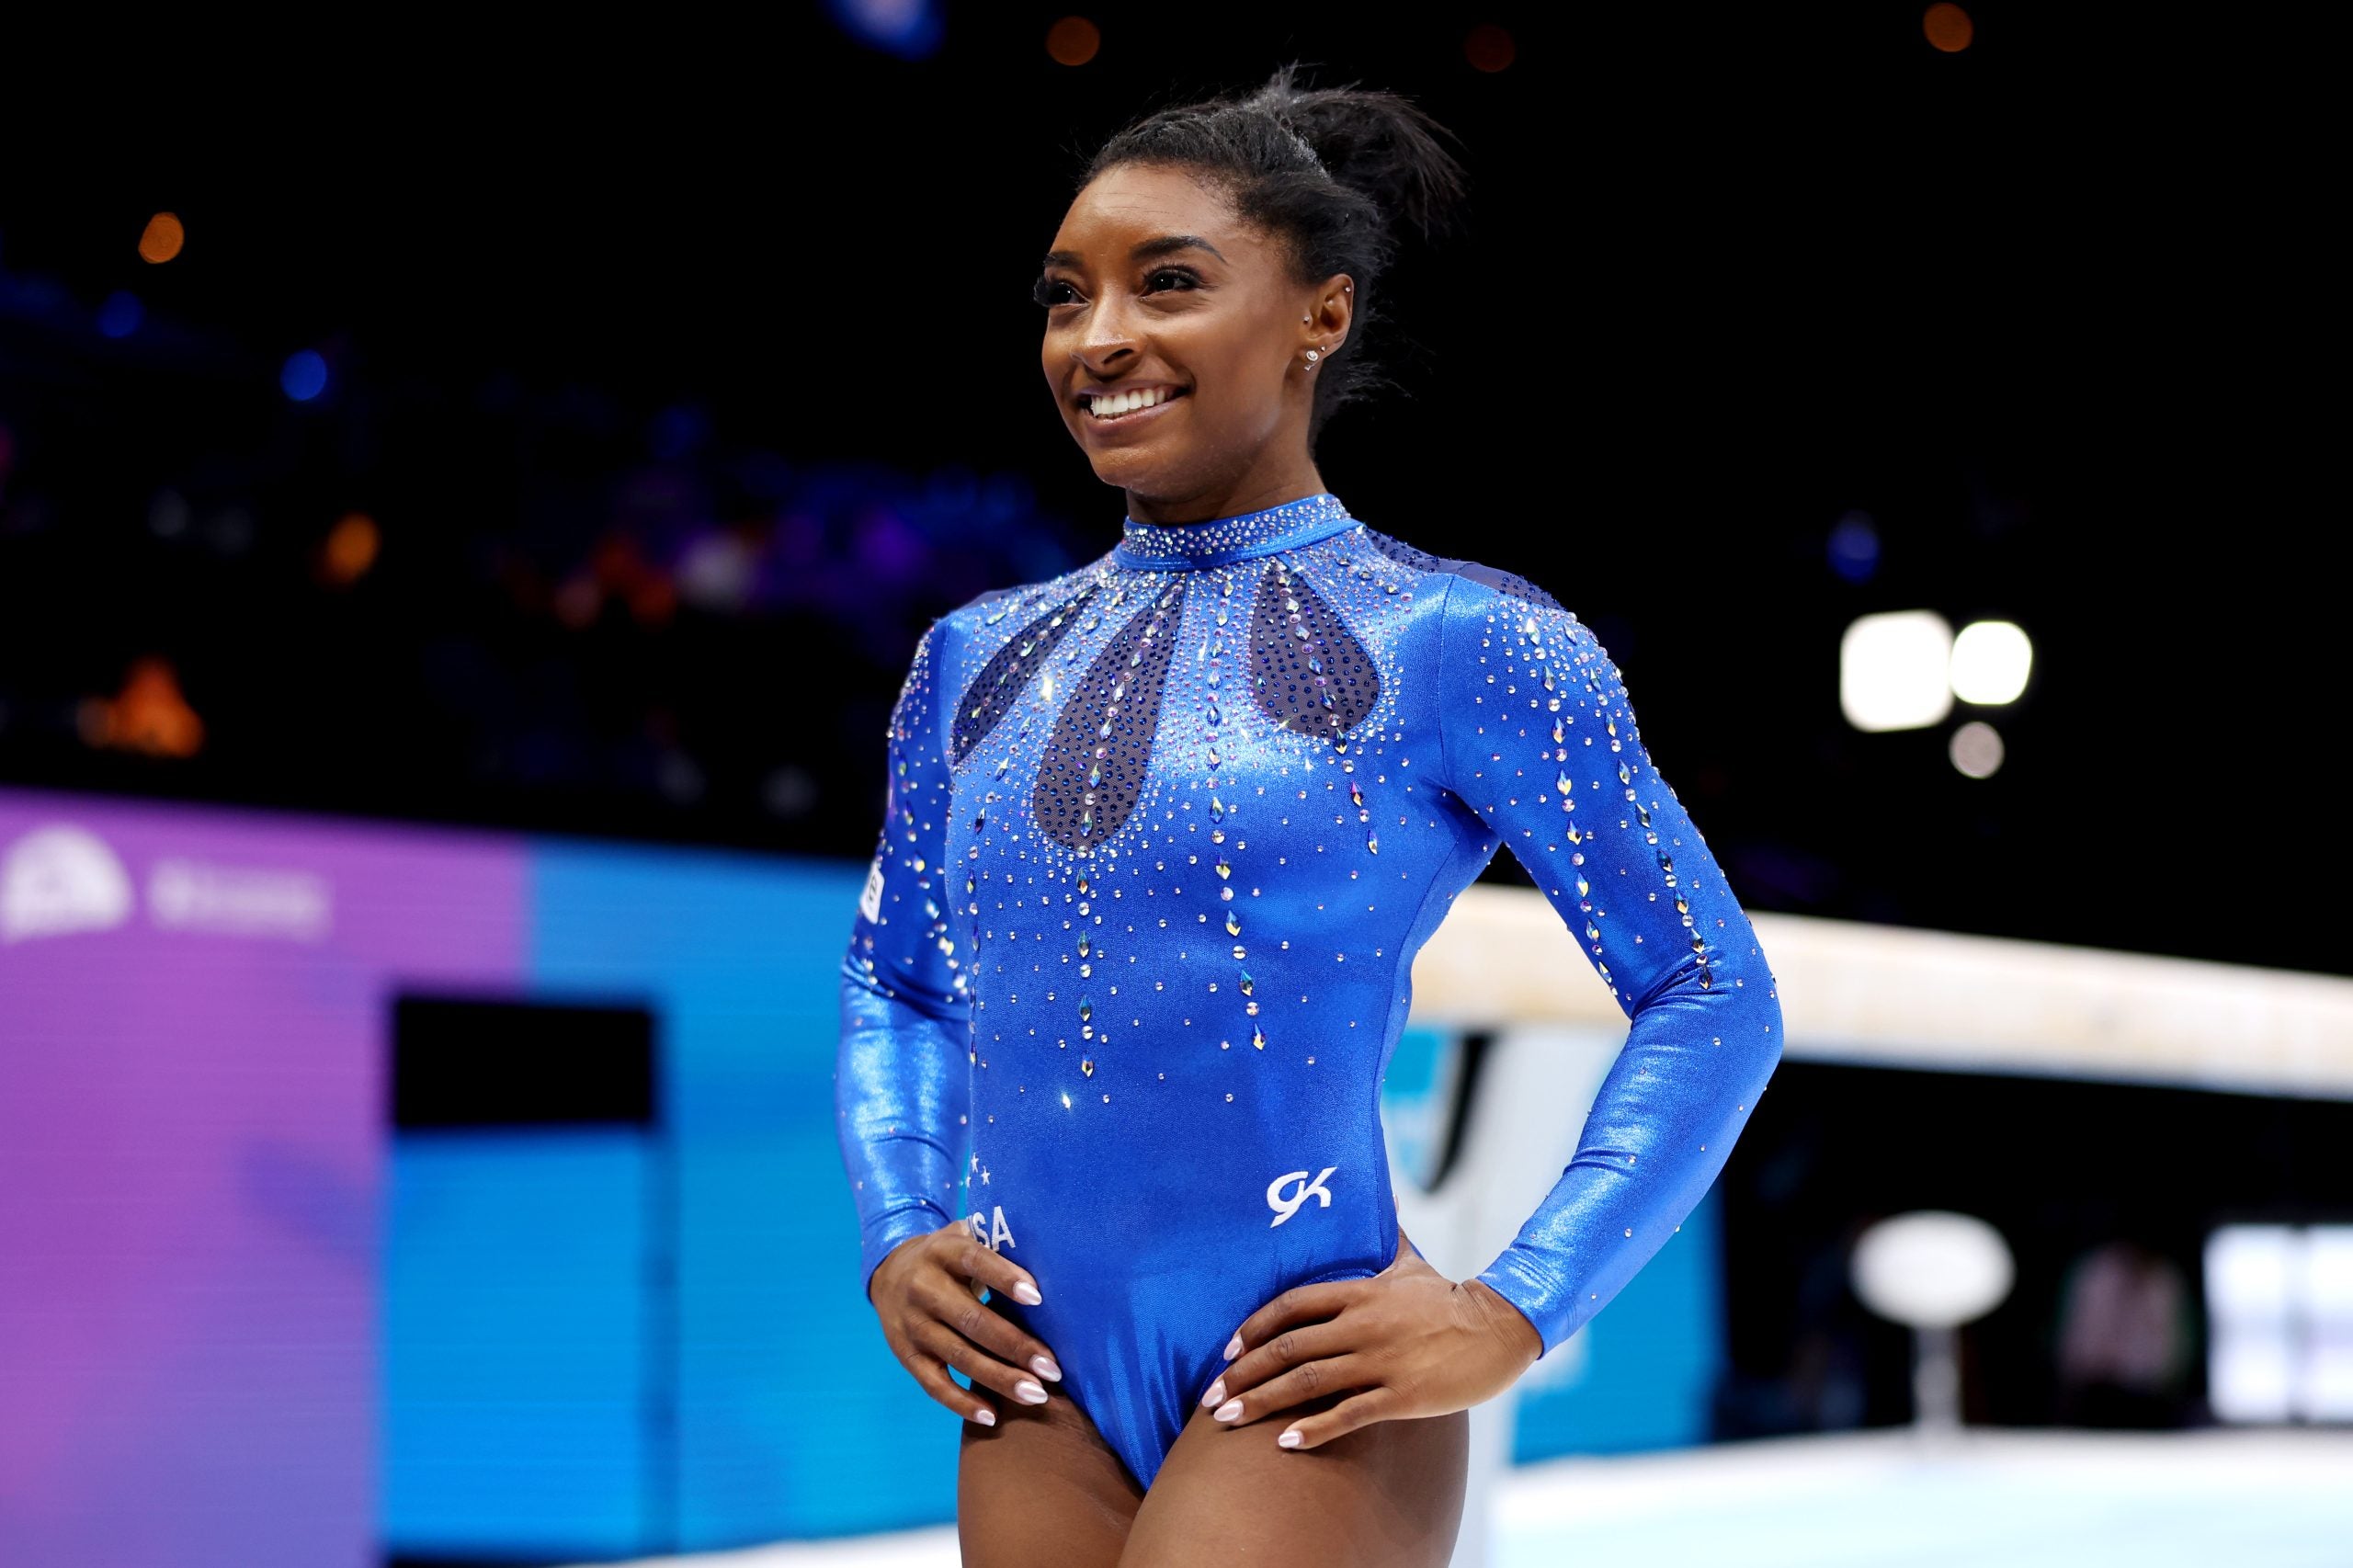 Simone Biles Is Now The Most Decorated Gymnast In History